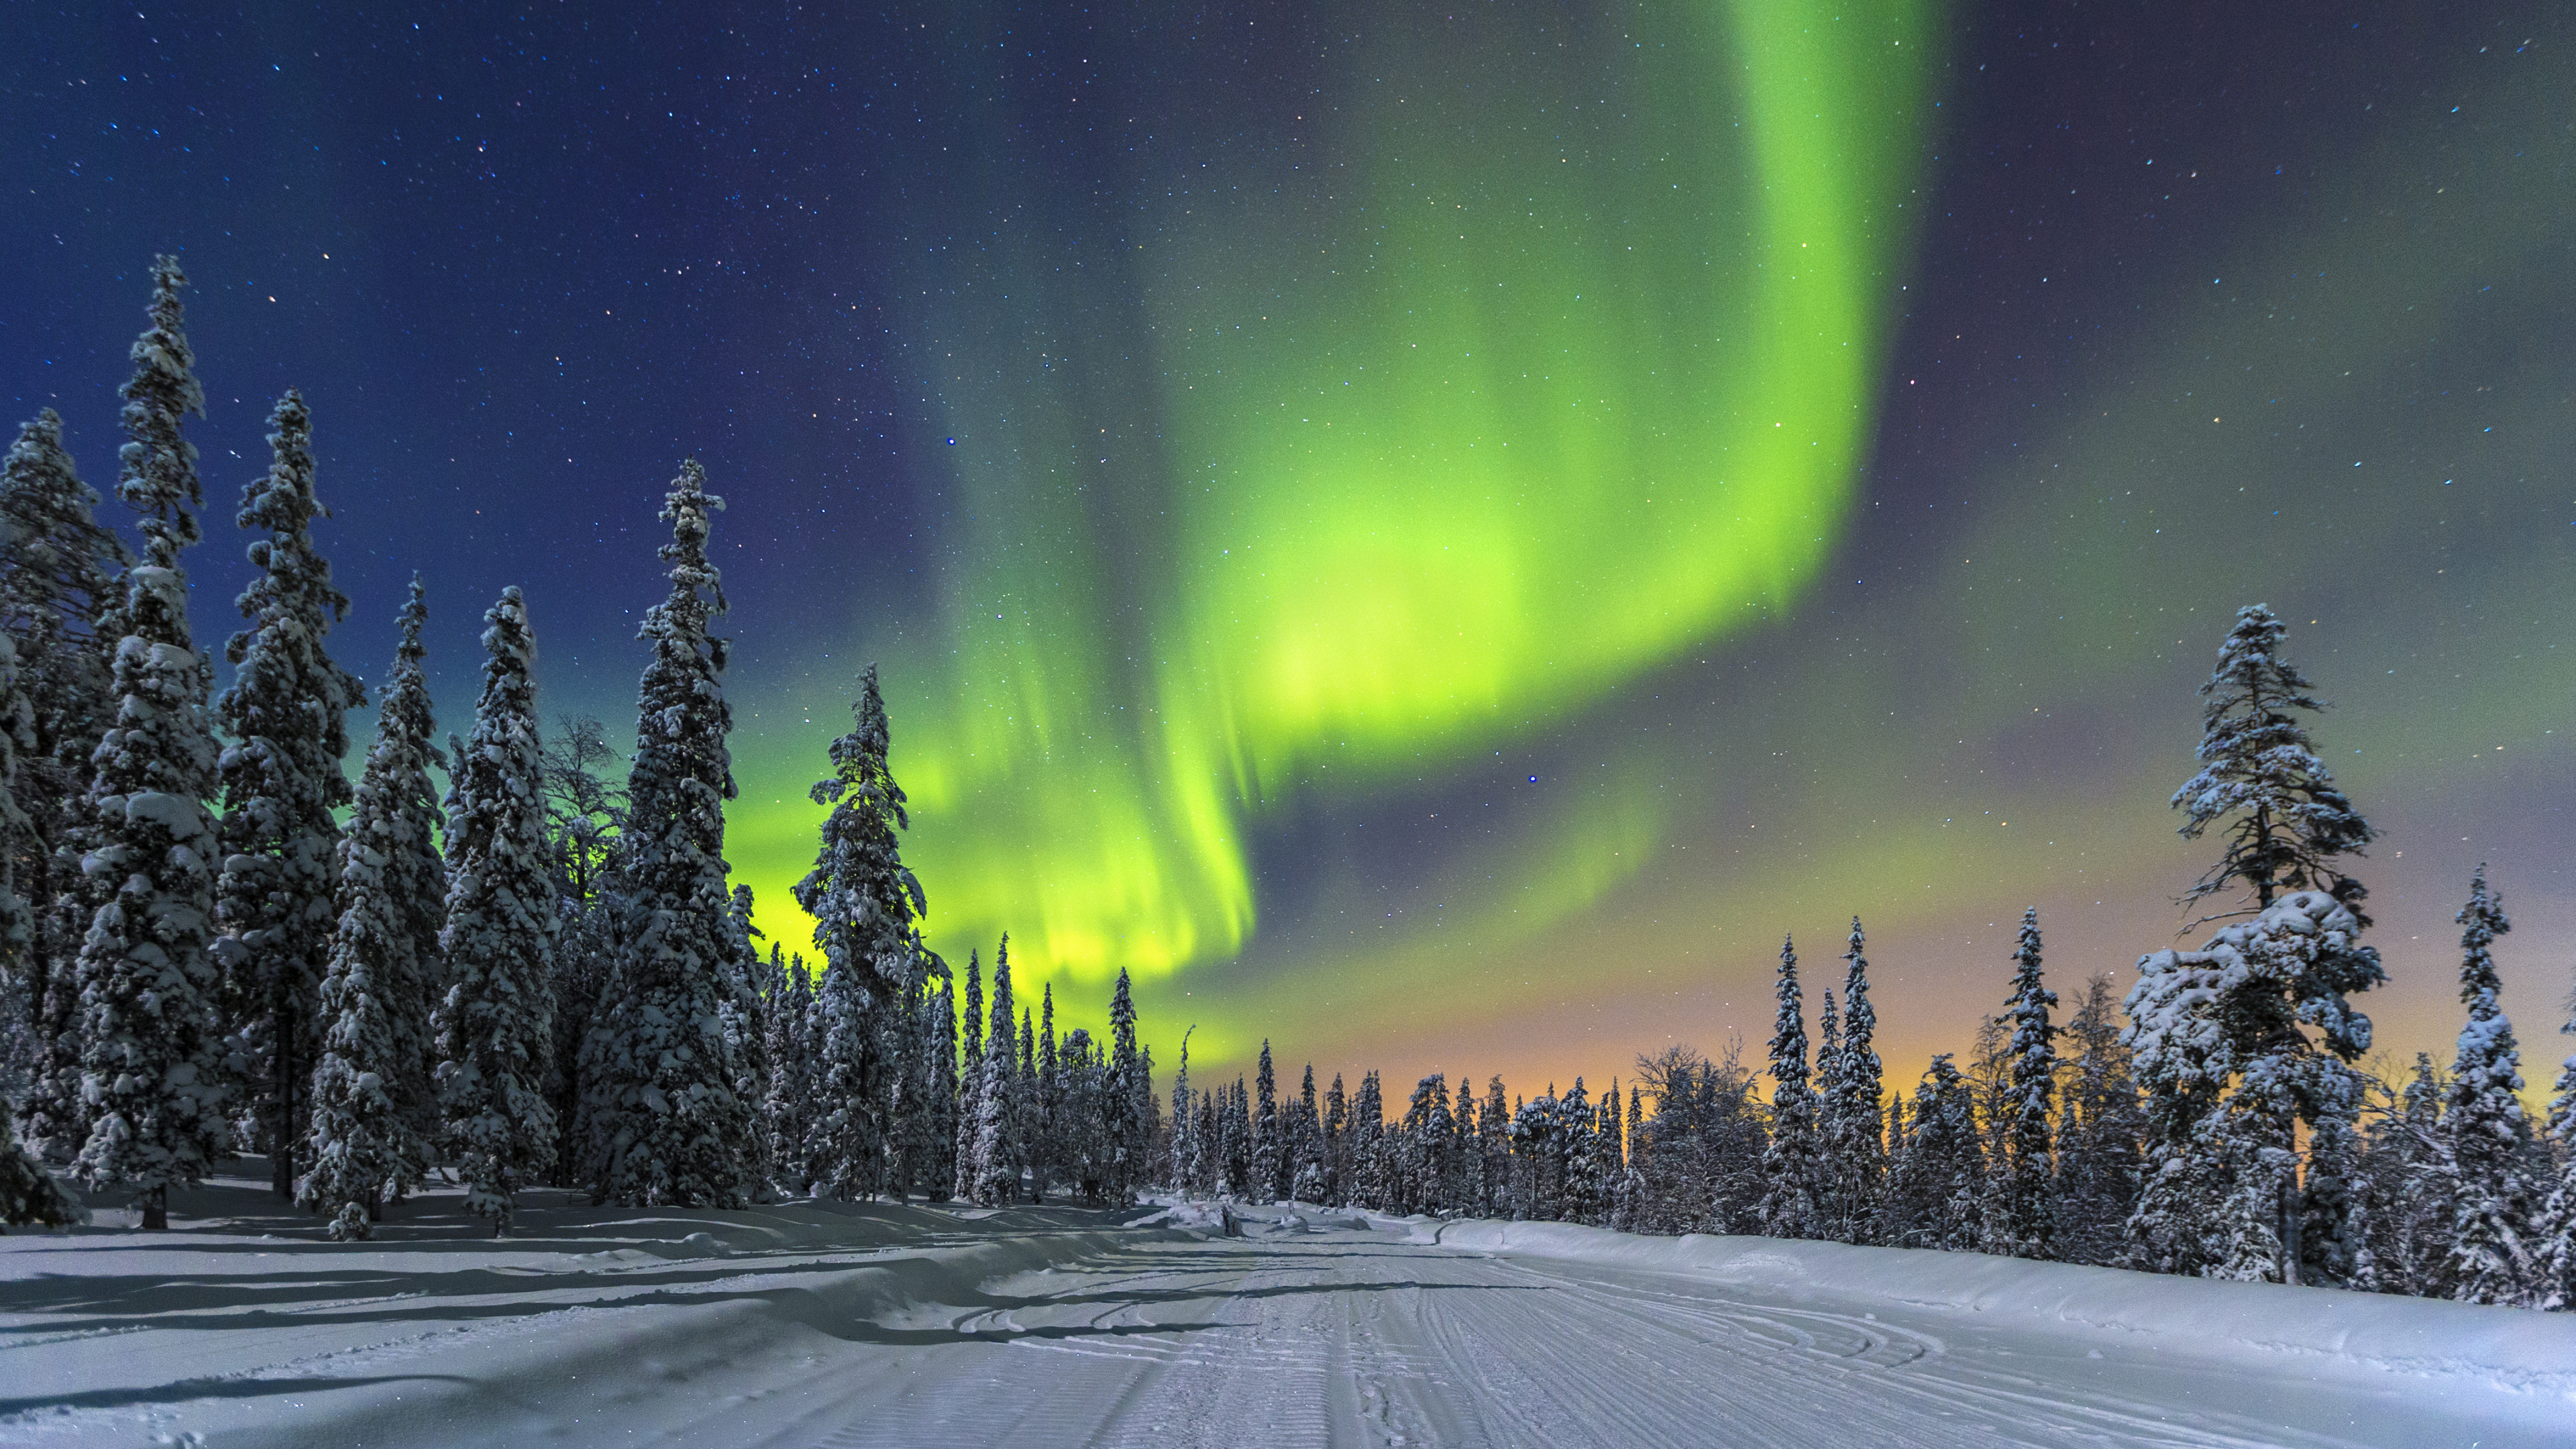 Green Aurora Lights Over Snow Covered Road During Night Time. Wallpaper in 3840x2160 Resolution